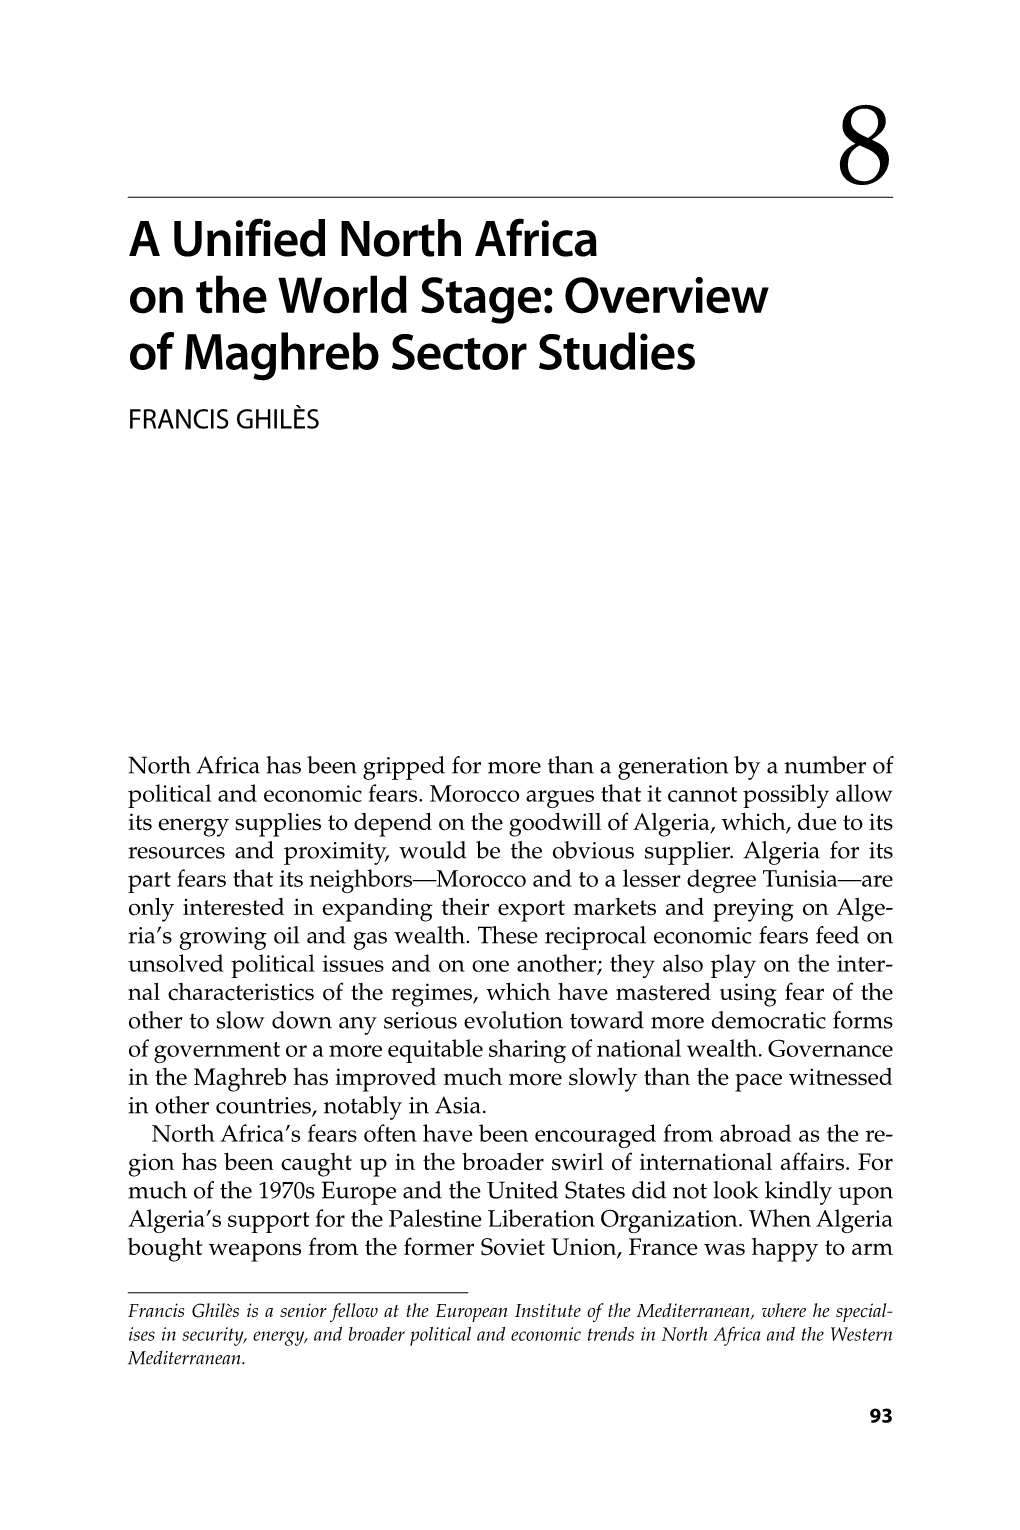 A Unified North Africa on the World Stage: Overview of Maghreb Sector Studies FRANCIS GHILÈS